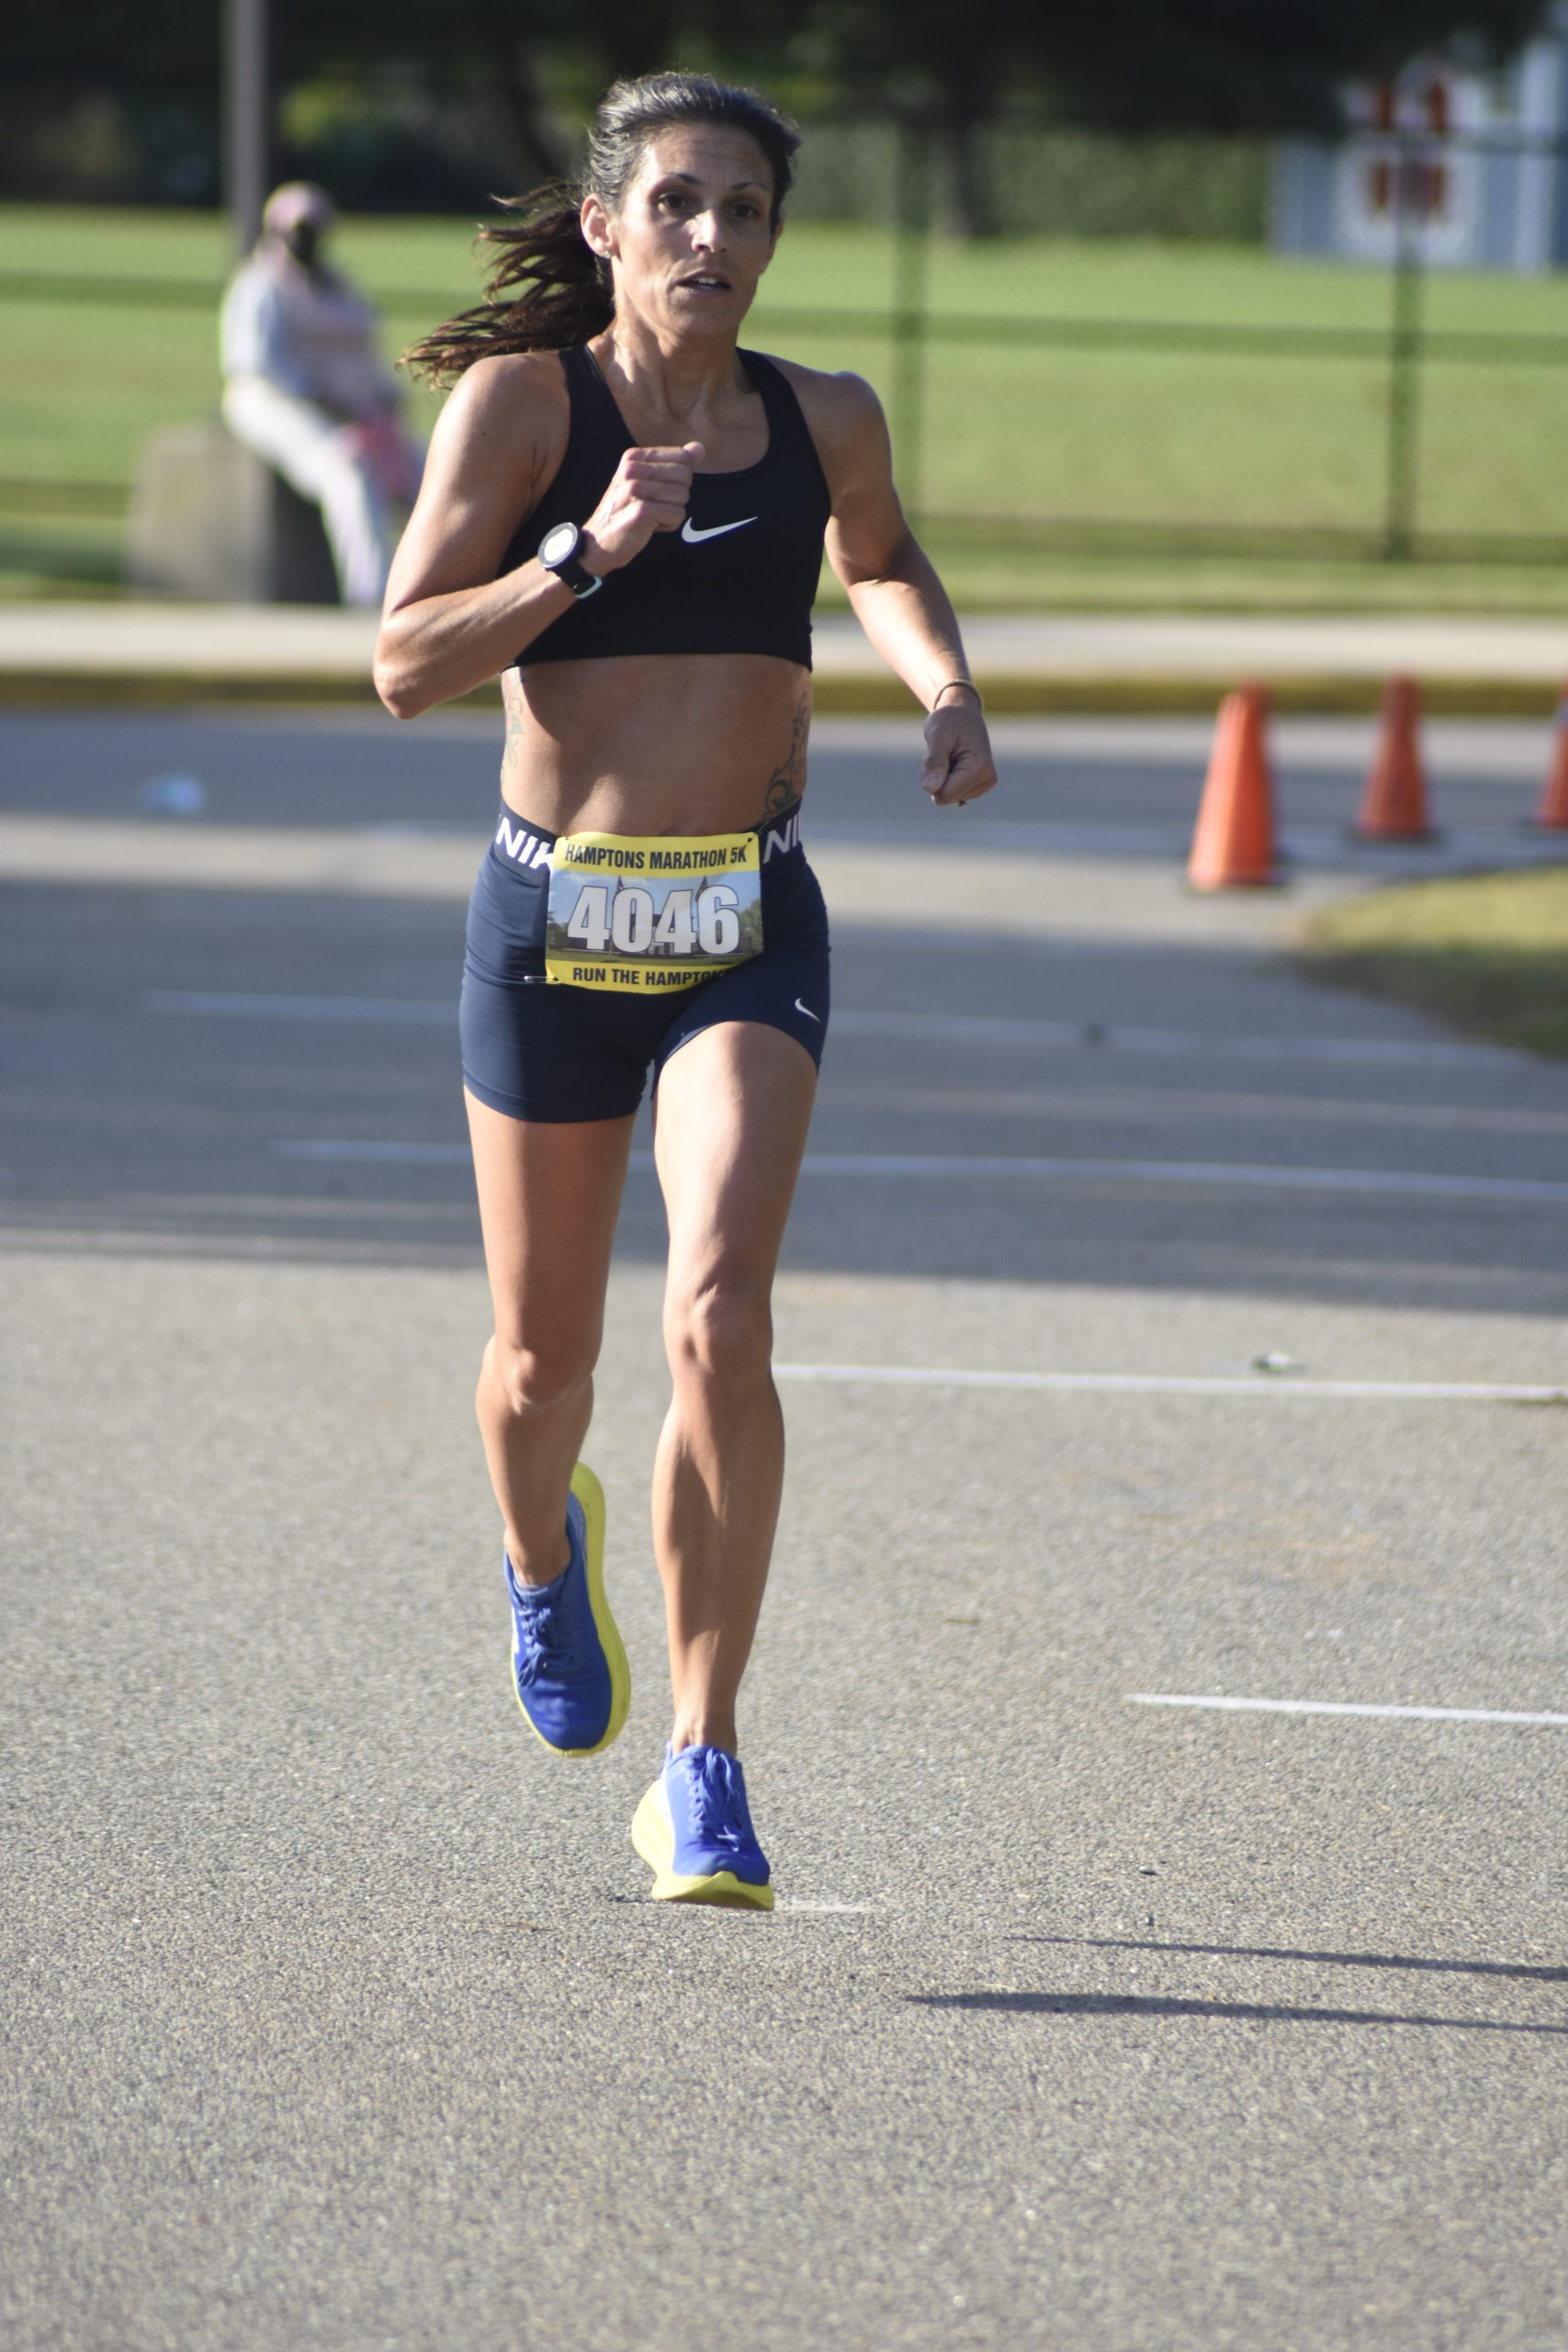 Tara Farrell of East Quogue was the female champion of the 5K.